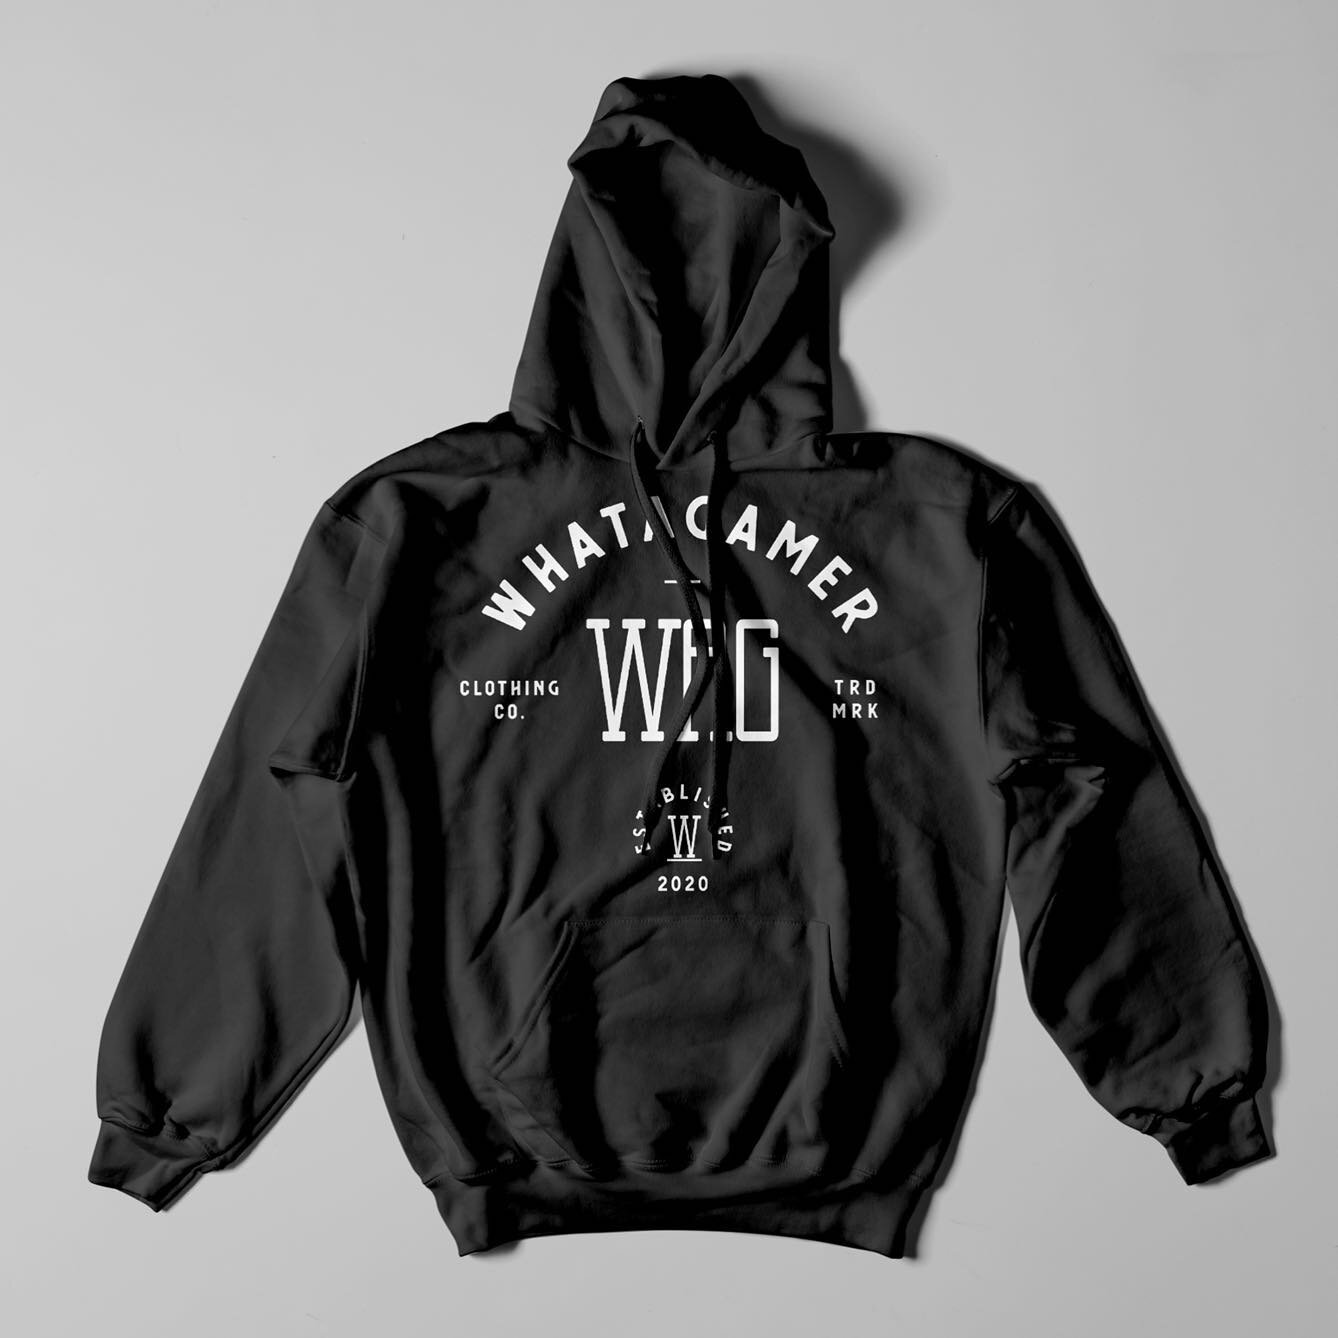 Hoodie weather is upon us! Shop all our fall merch exclusive online at whatagamer.store